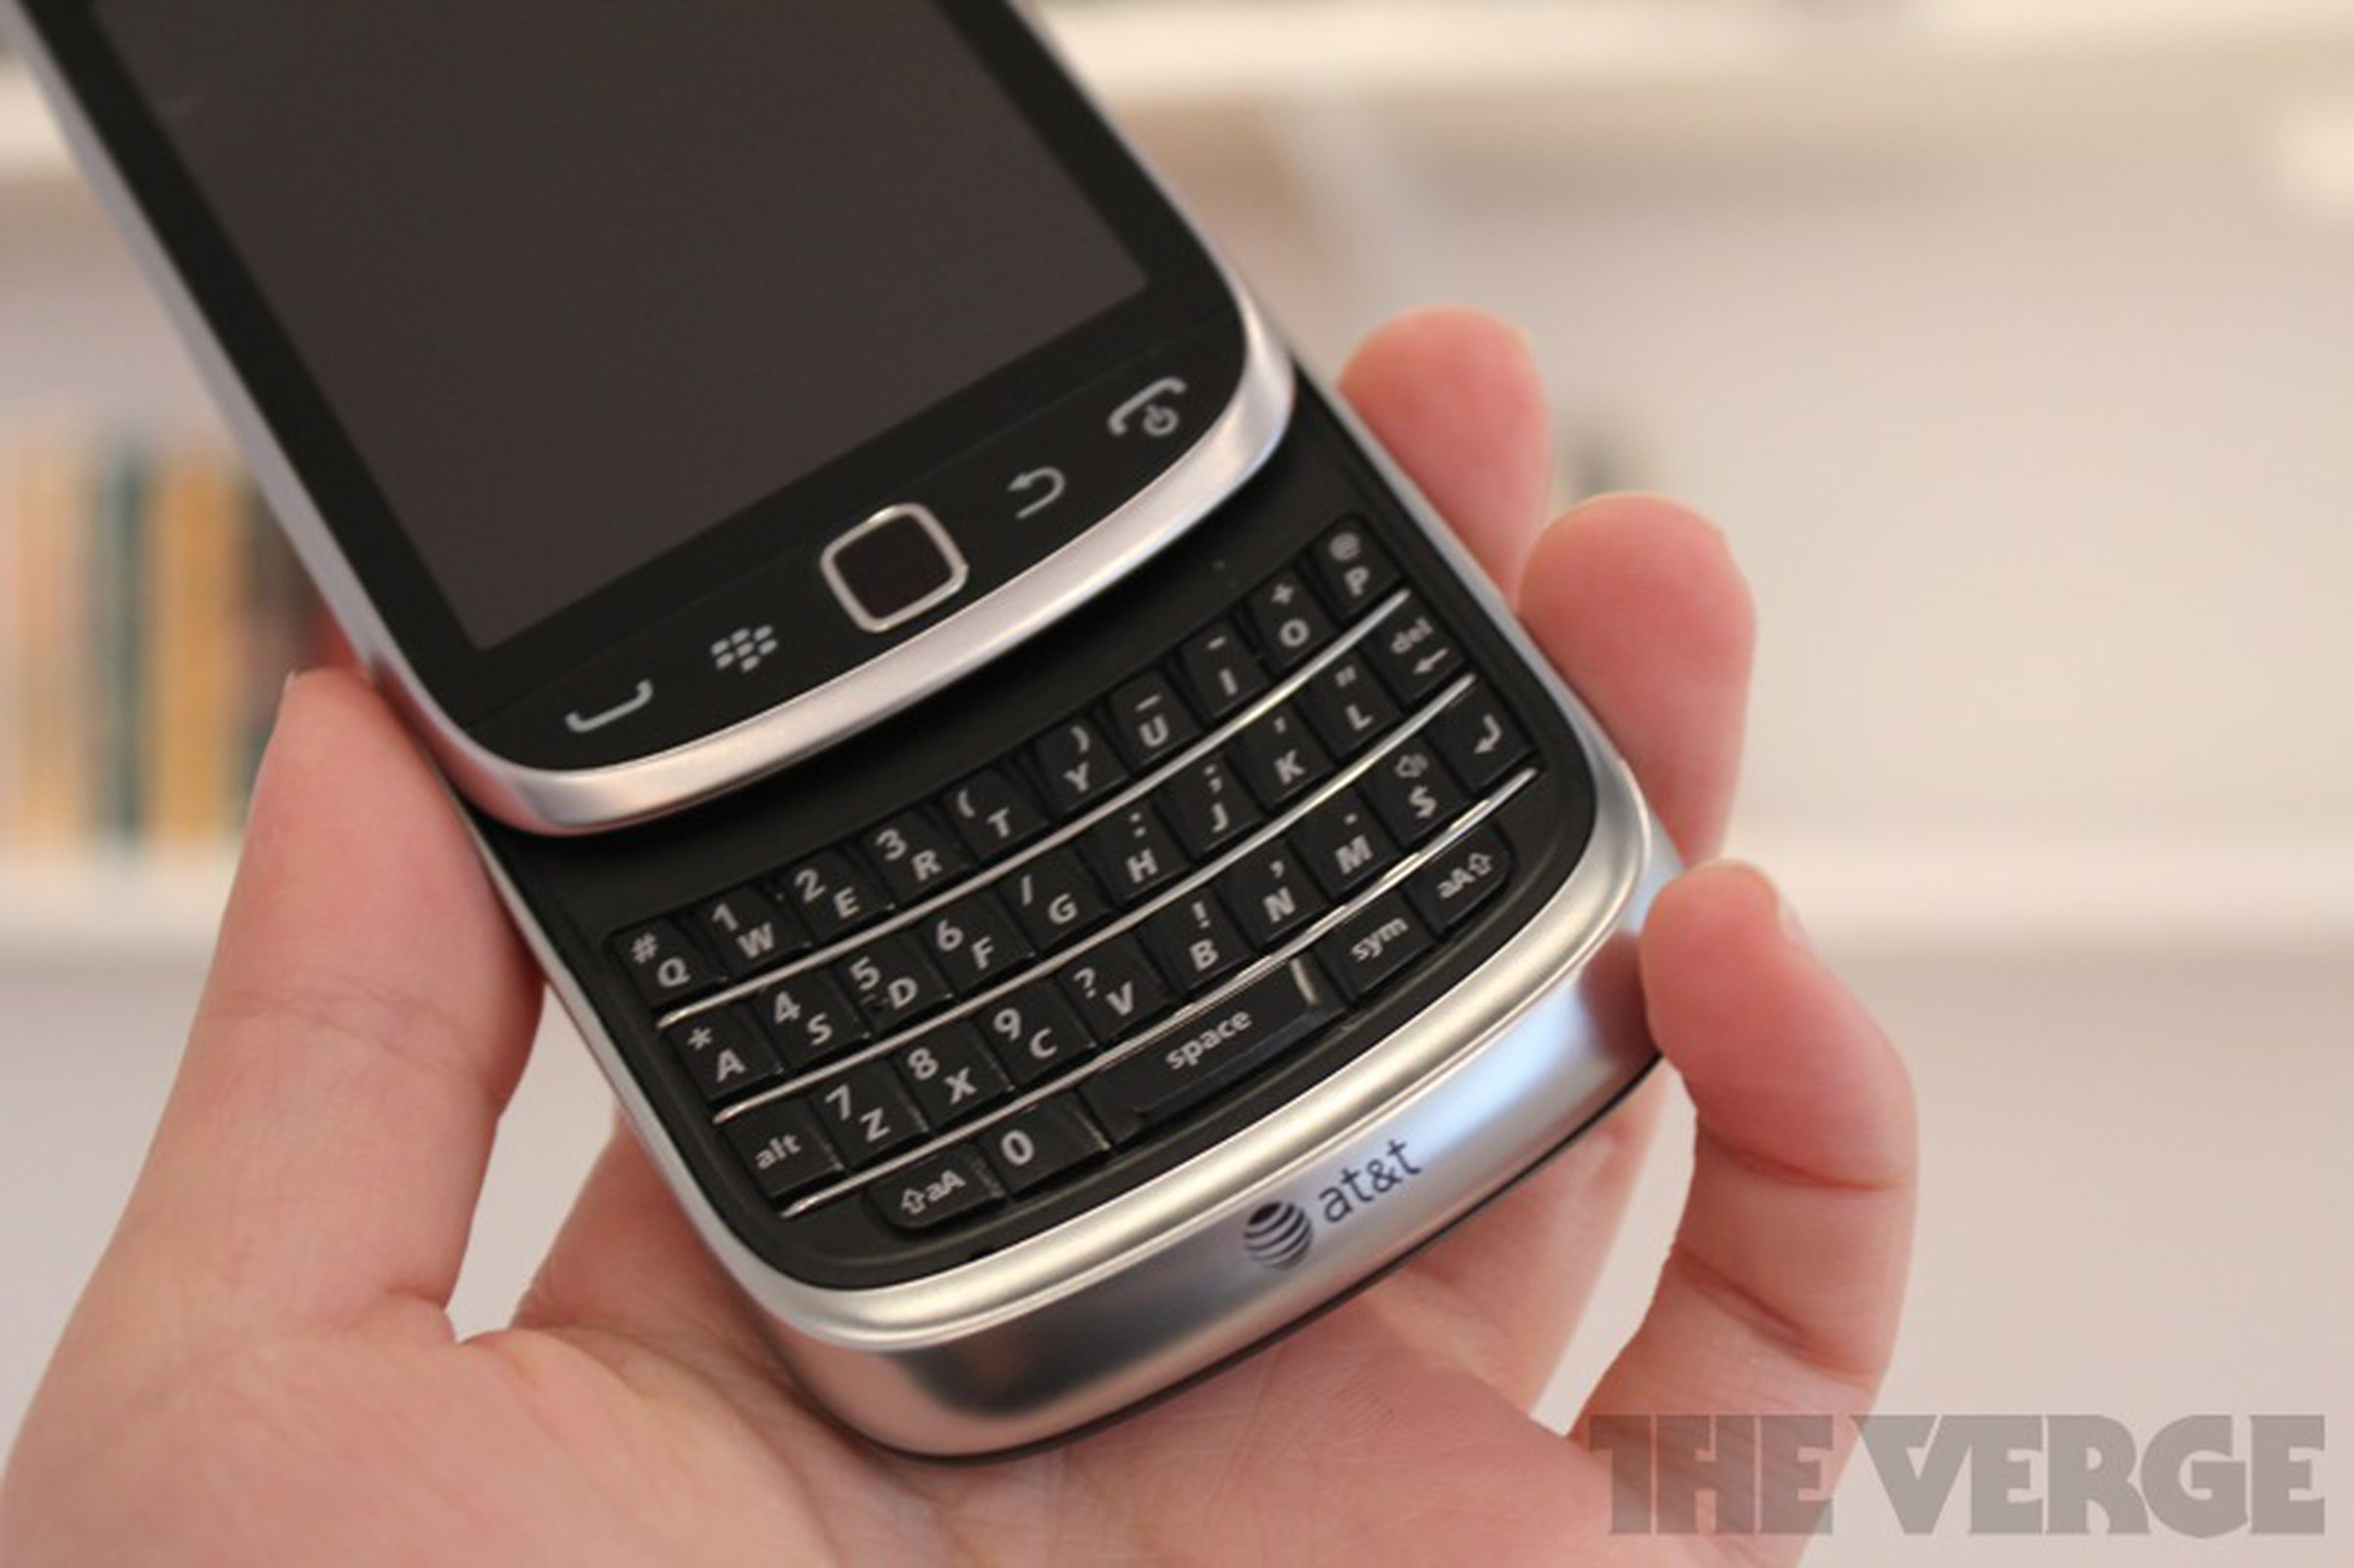 BlackBerry Torch 9810 review 